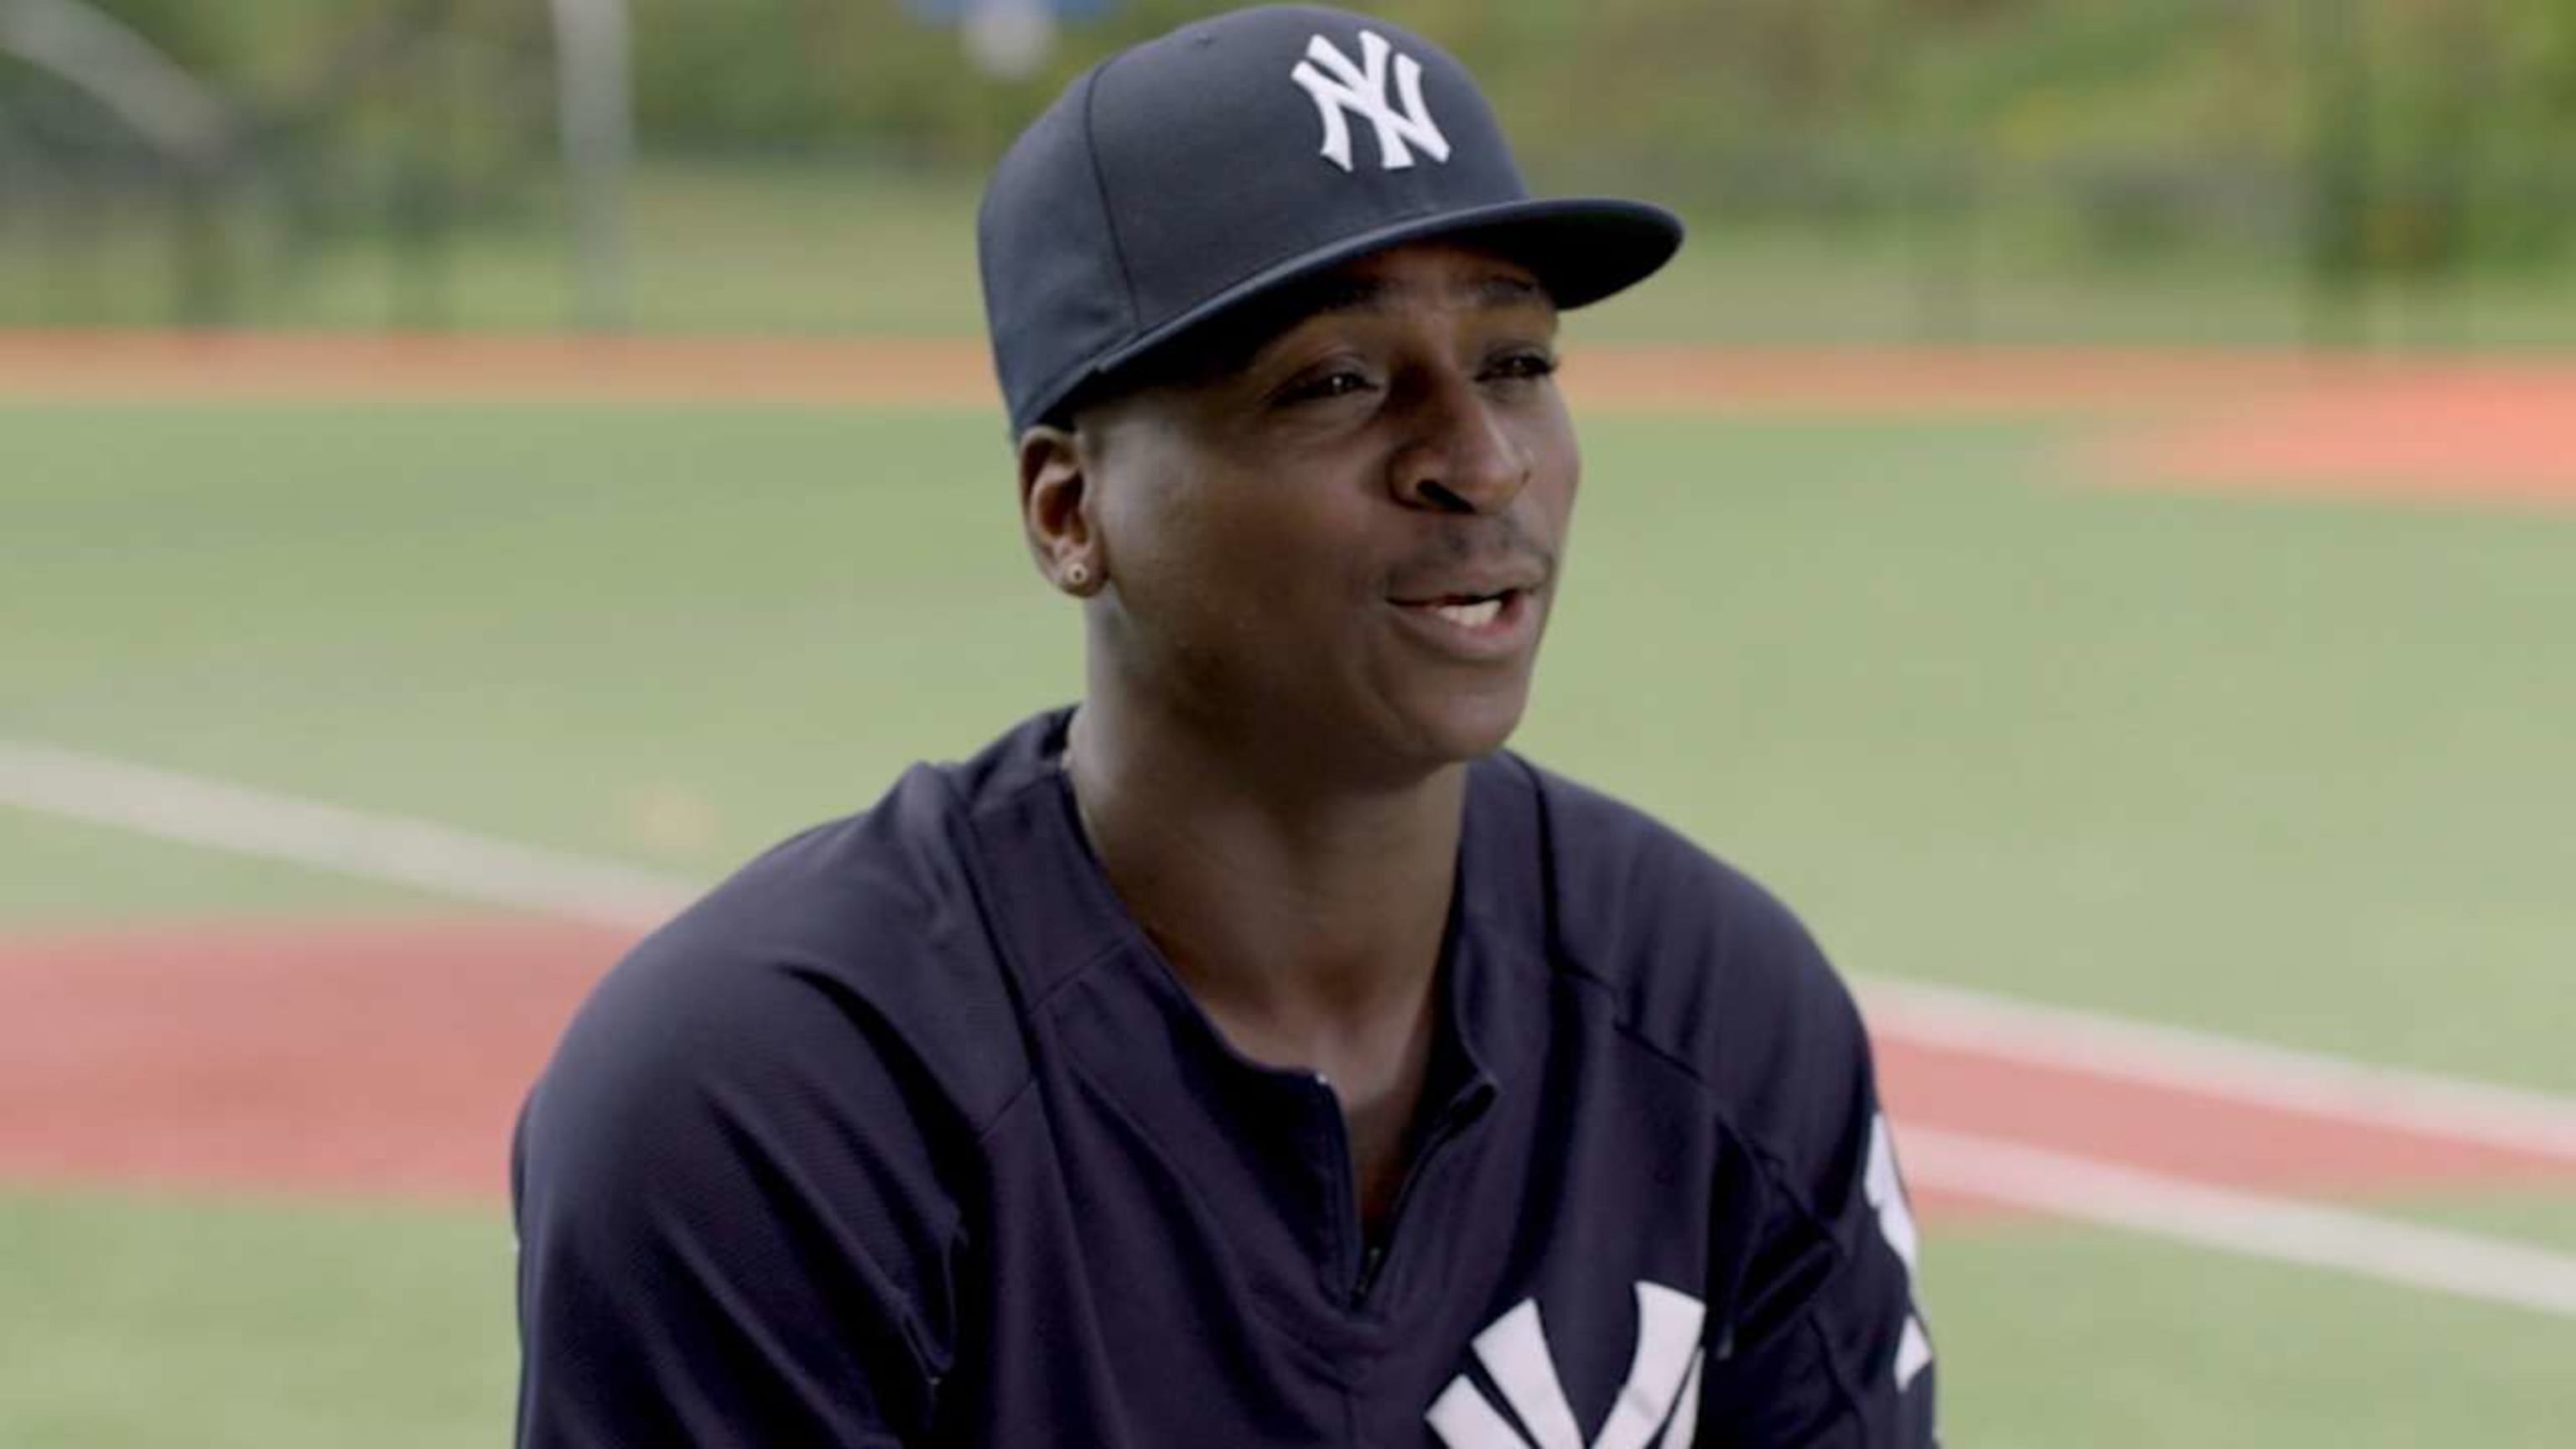 Didi Gregorius' Twitter has made him one of the most endearing